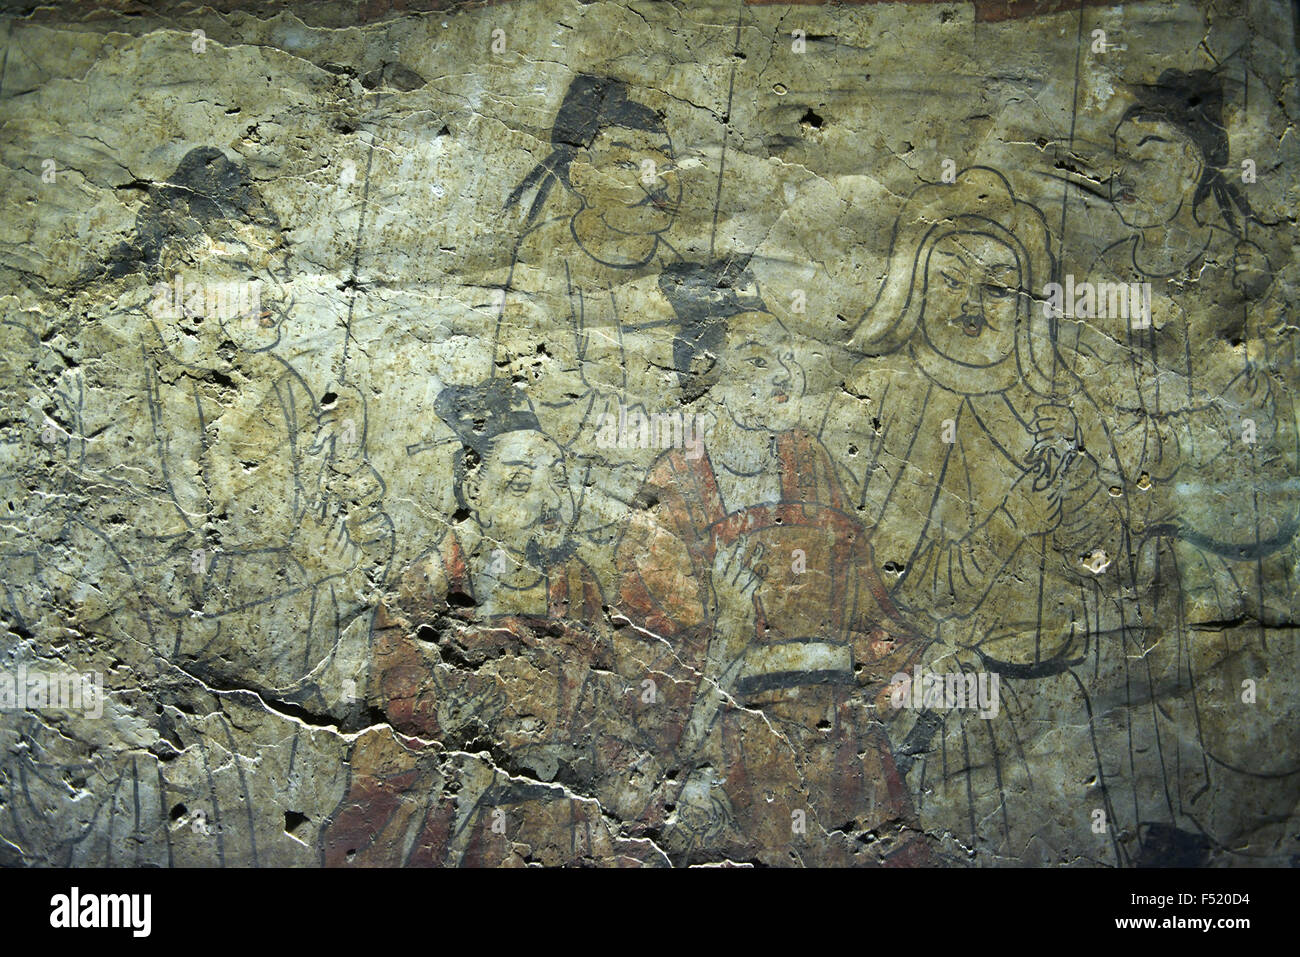 Tang Dynasty tomb murals. Shanxi Museum in Xi'an, China. Stock Photo